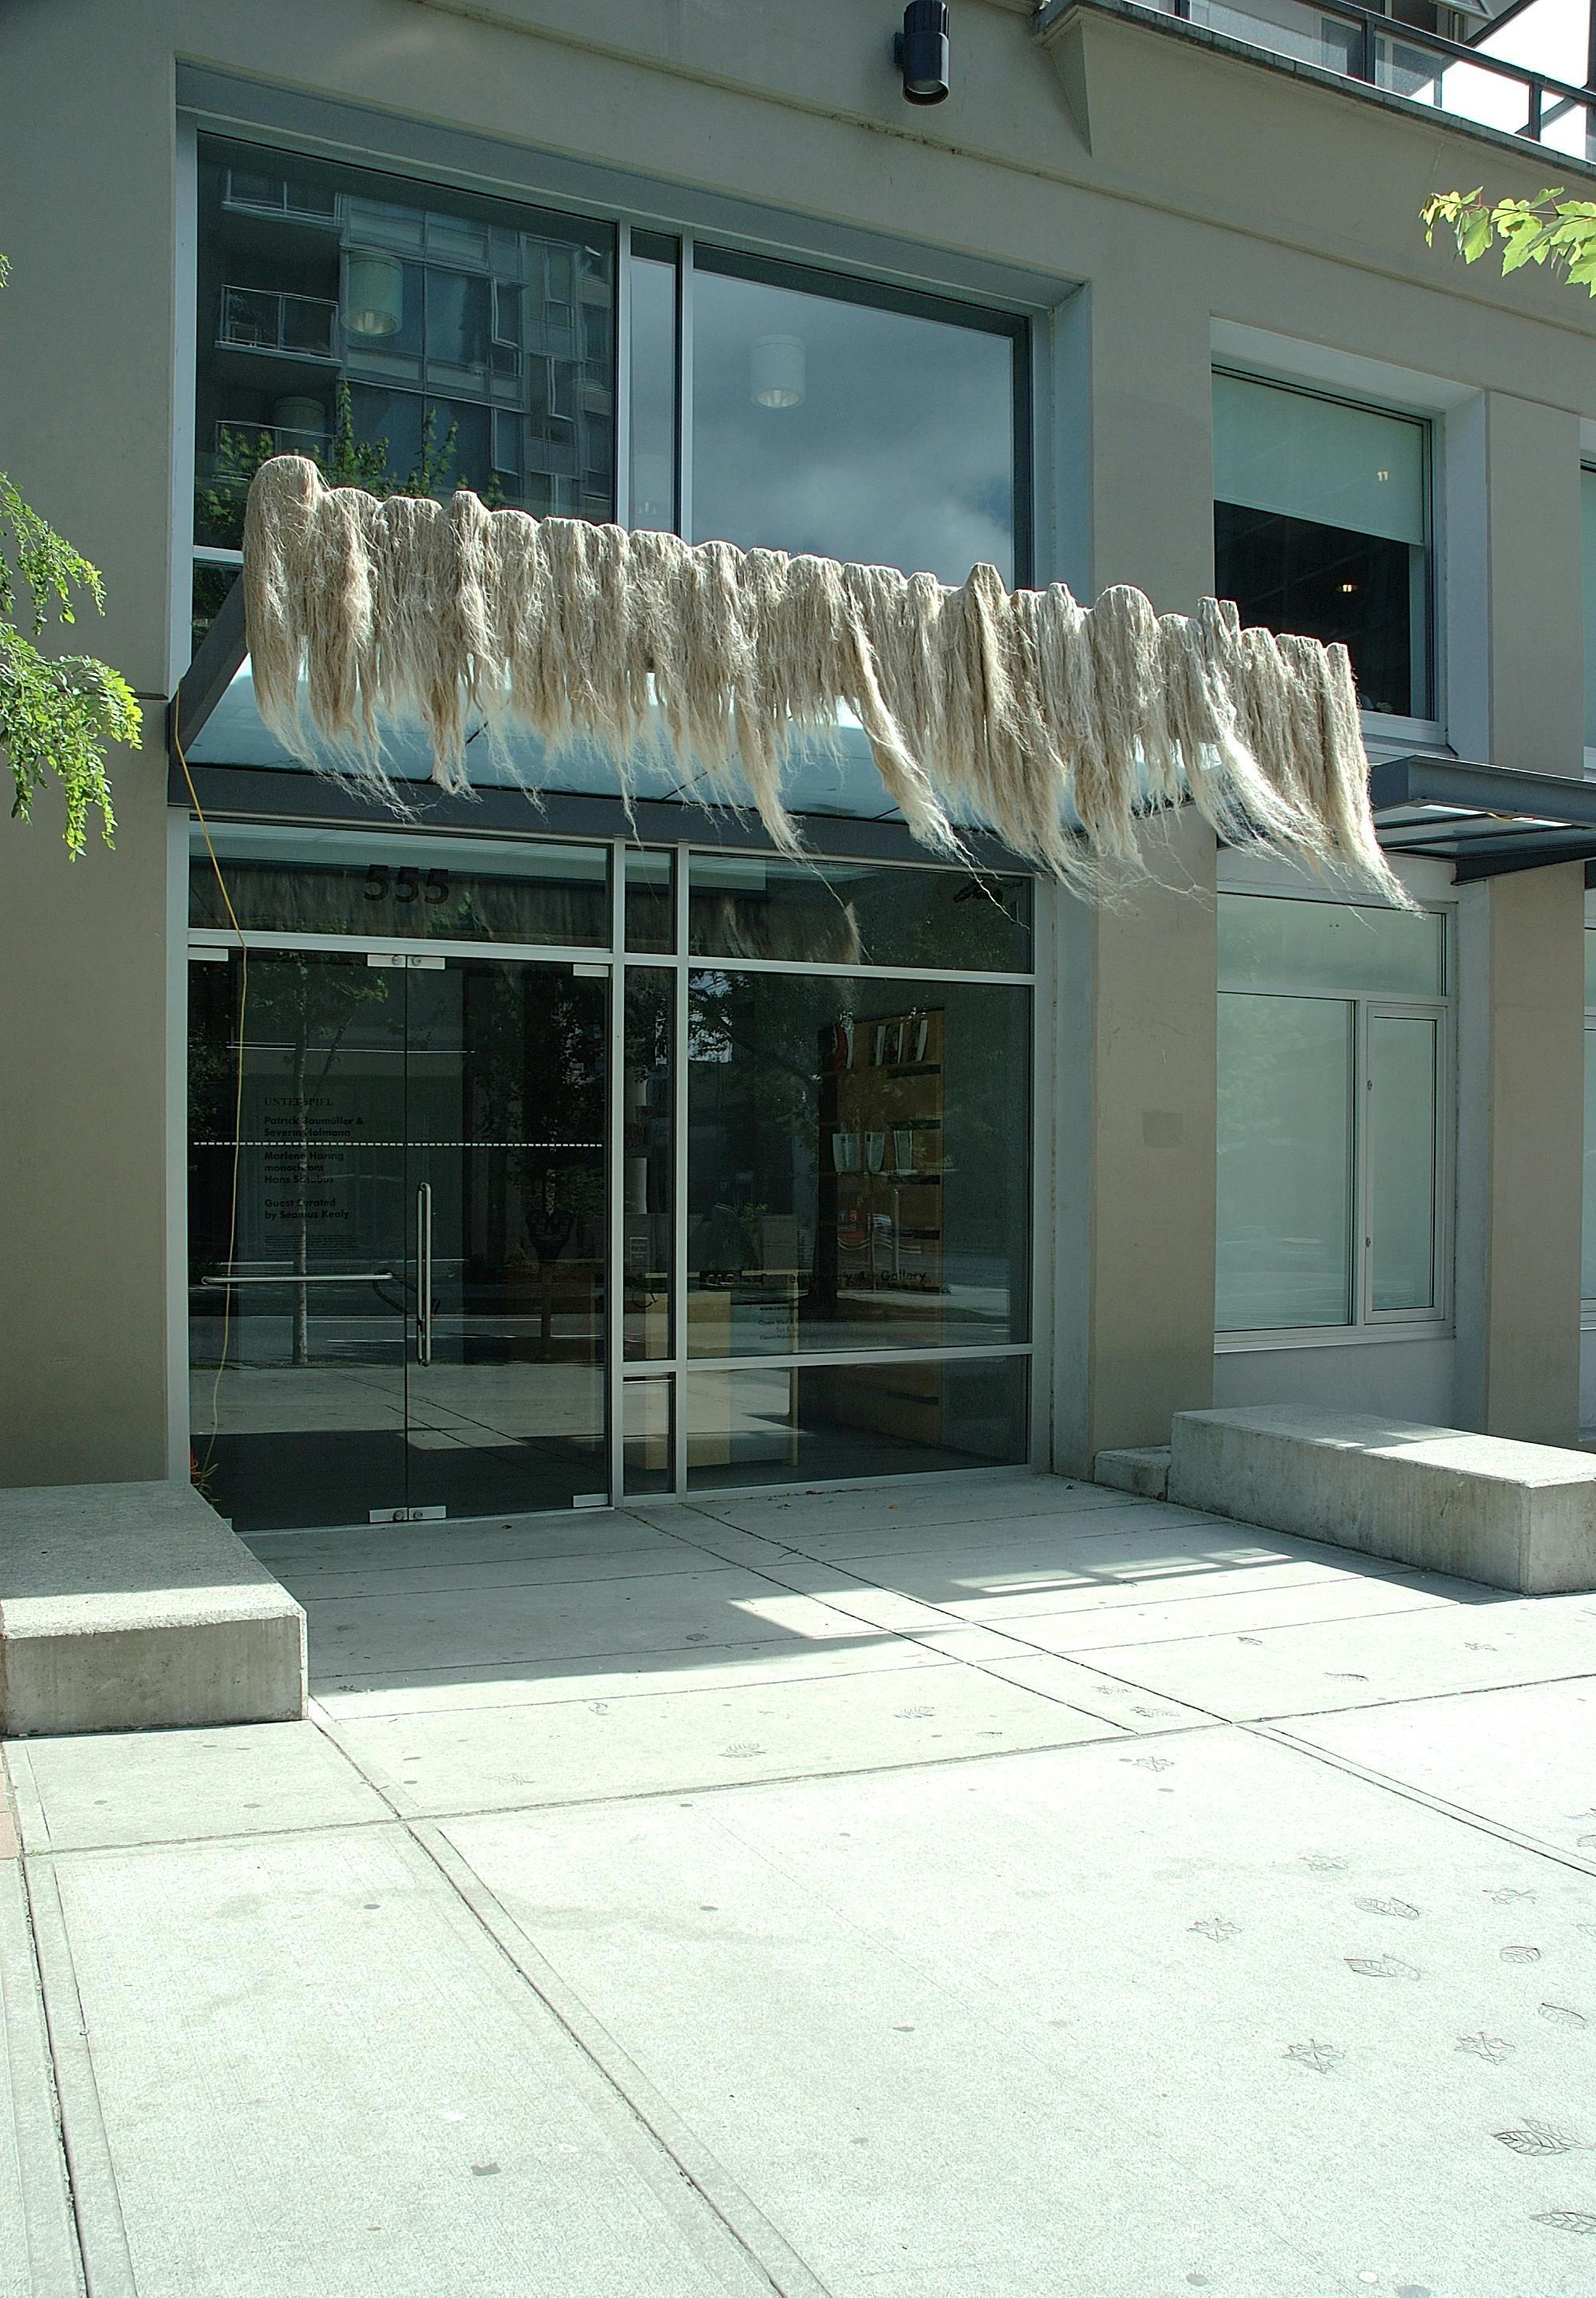 An installation image of an art piece above the CAG’s entrance door. On the glass-and-metal awning above the entrance, thick, ragged plumber's hemp are mounted. Strings of hemp lined up and swinging in the air may remind a viewer of long blond hair.